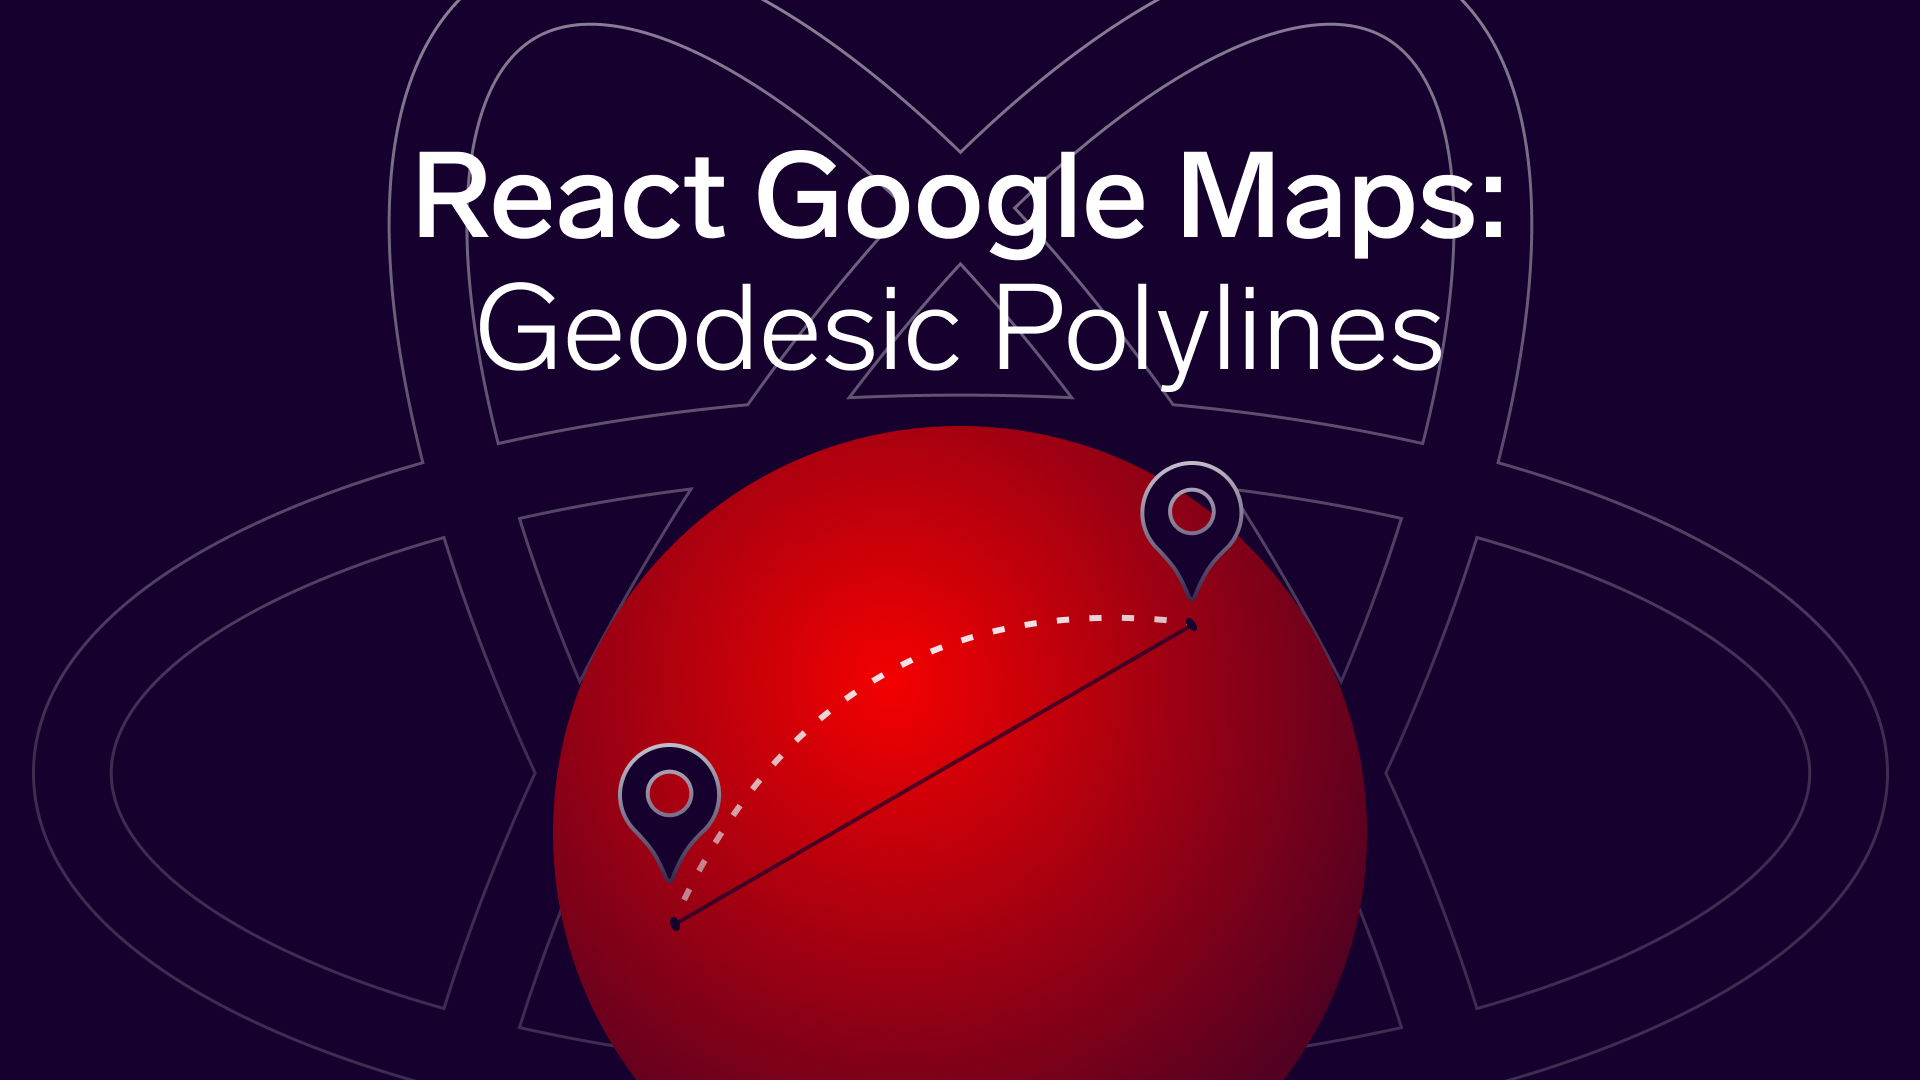 React Google Maps Geodesic Polylines, Polygons